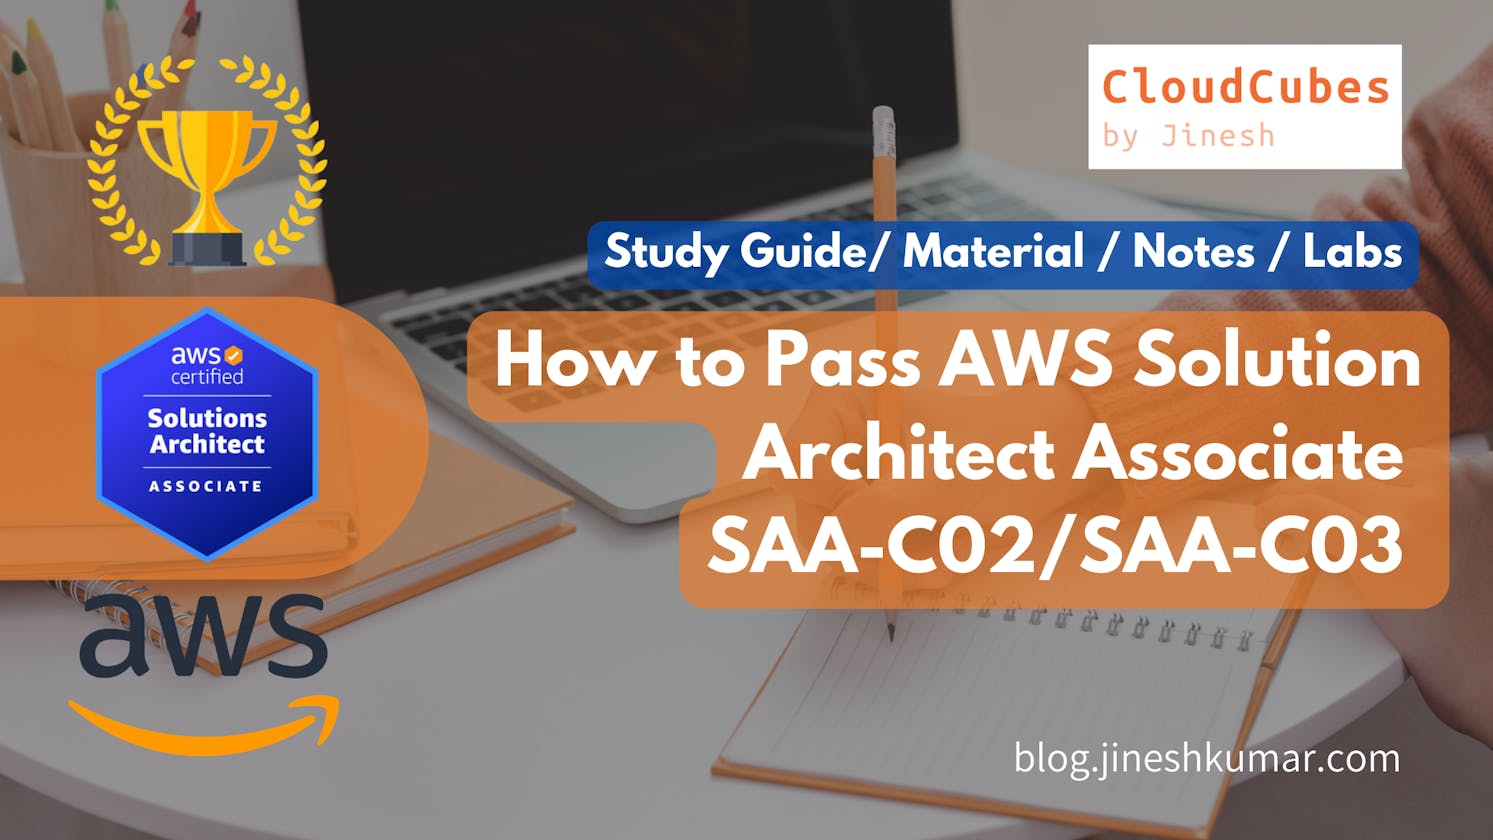 How to Pass AWS Solution Architect Associate SAA-C02/SAA-C03 in 2022-2023